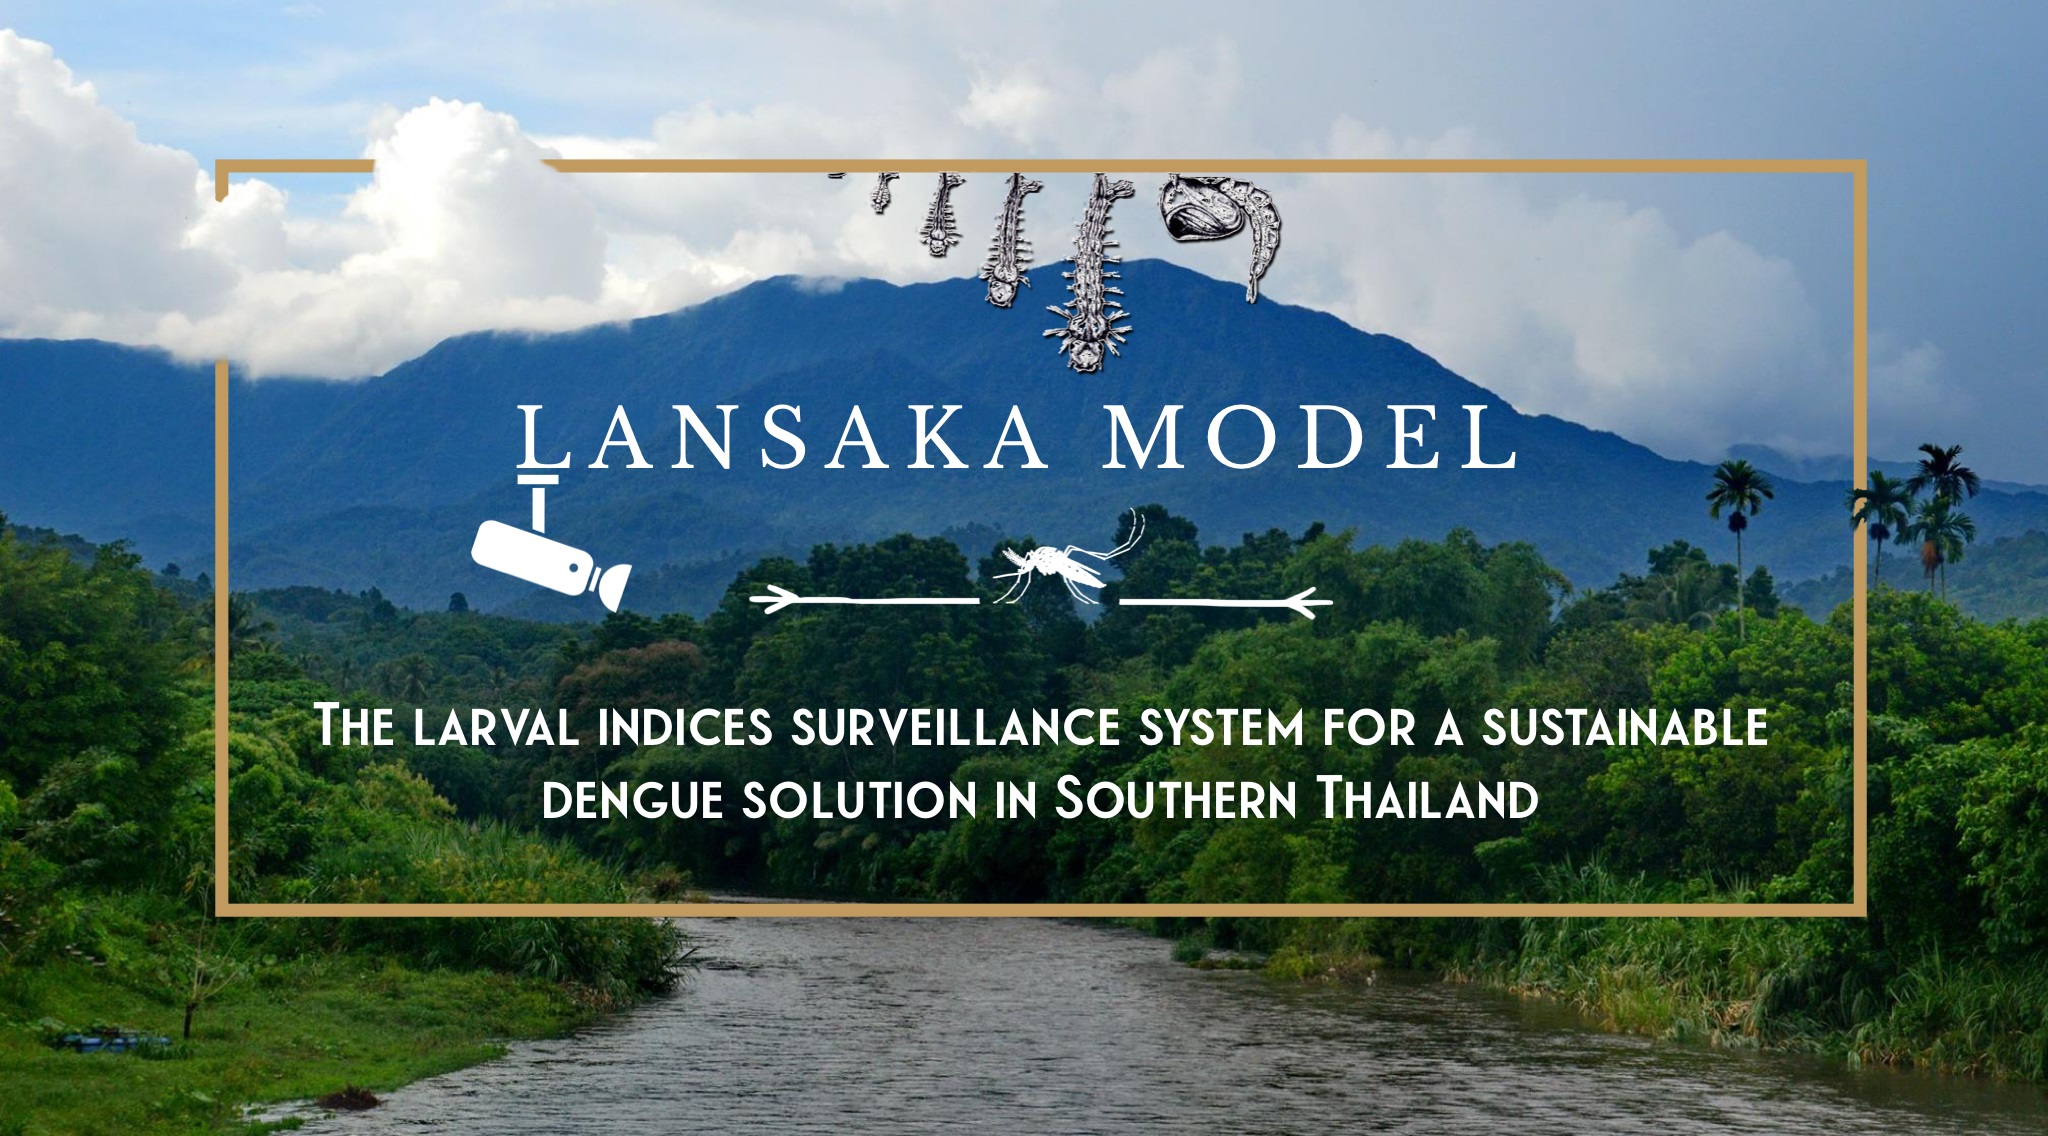 The Lansaka Model ‒ the Larval Indices Surveillance System for a Sustainable Dengue Solution in Southern Thailand